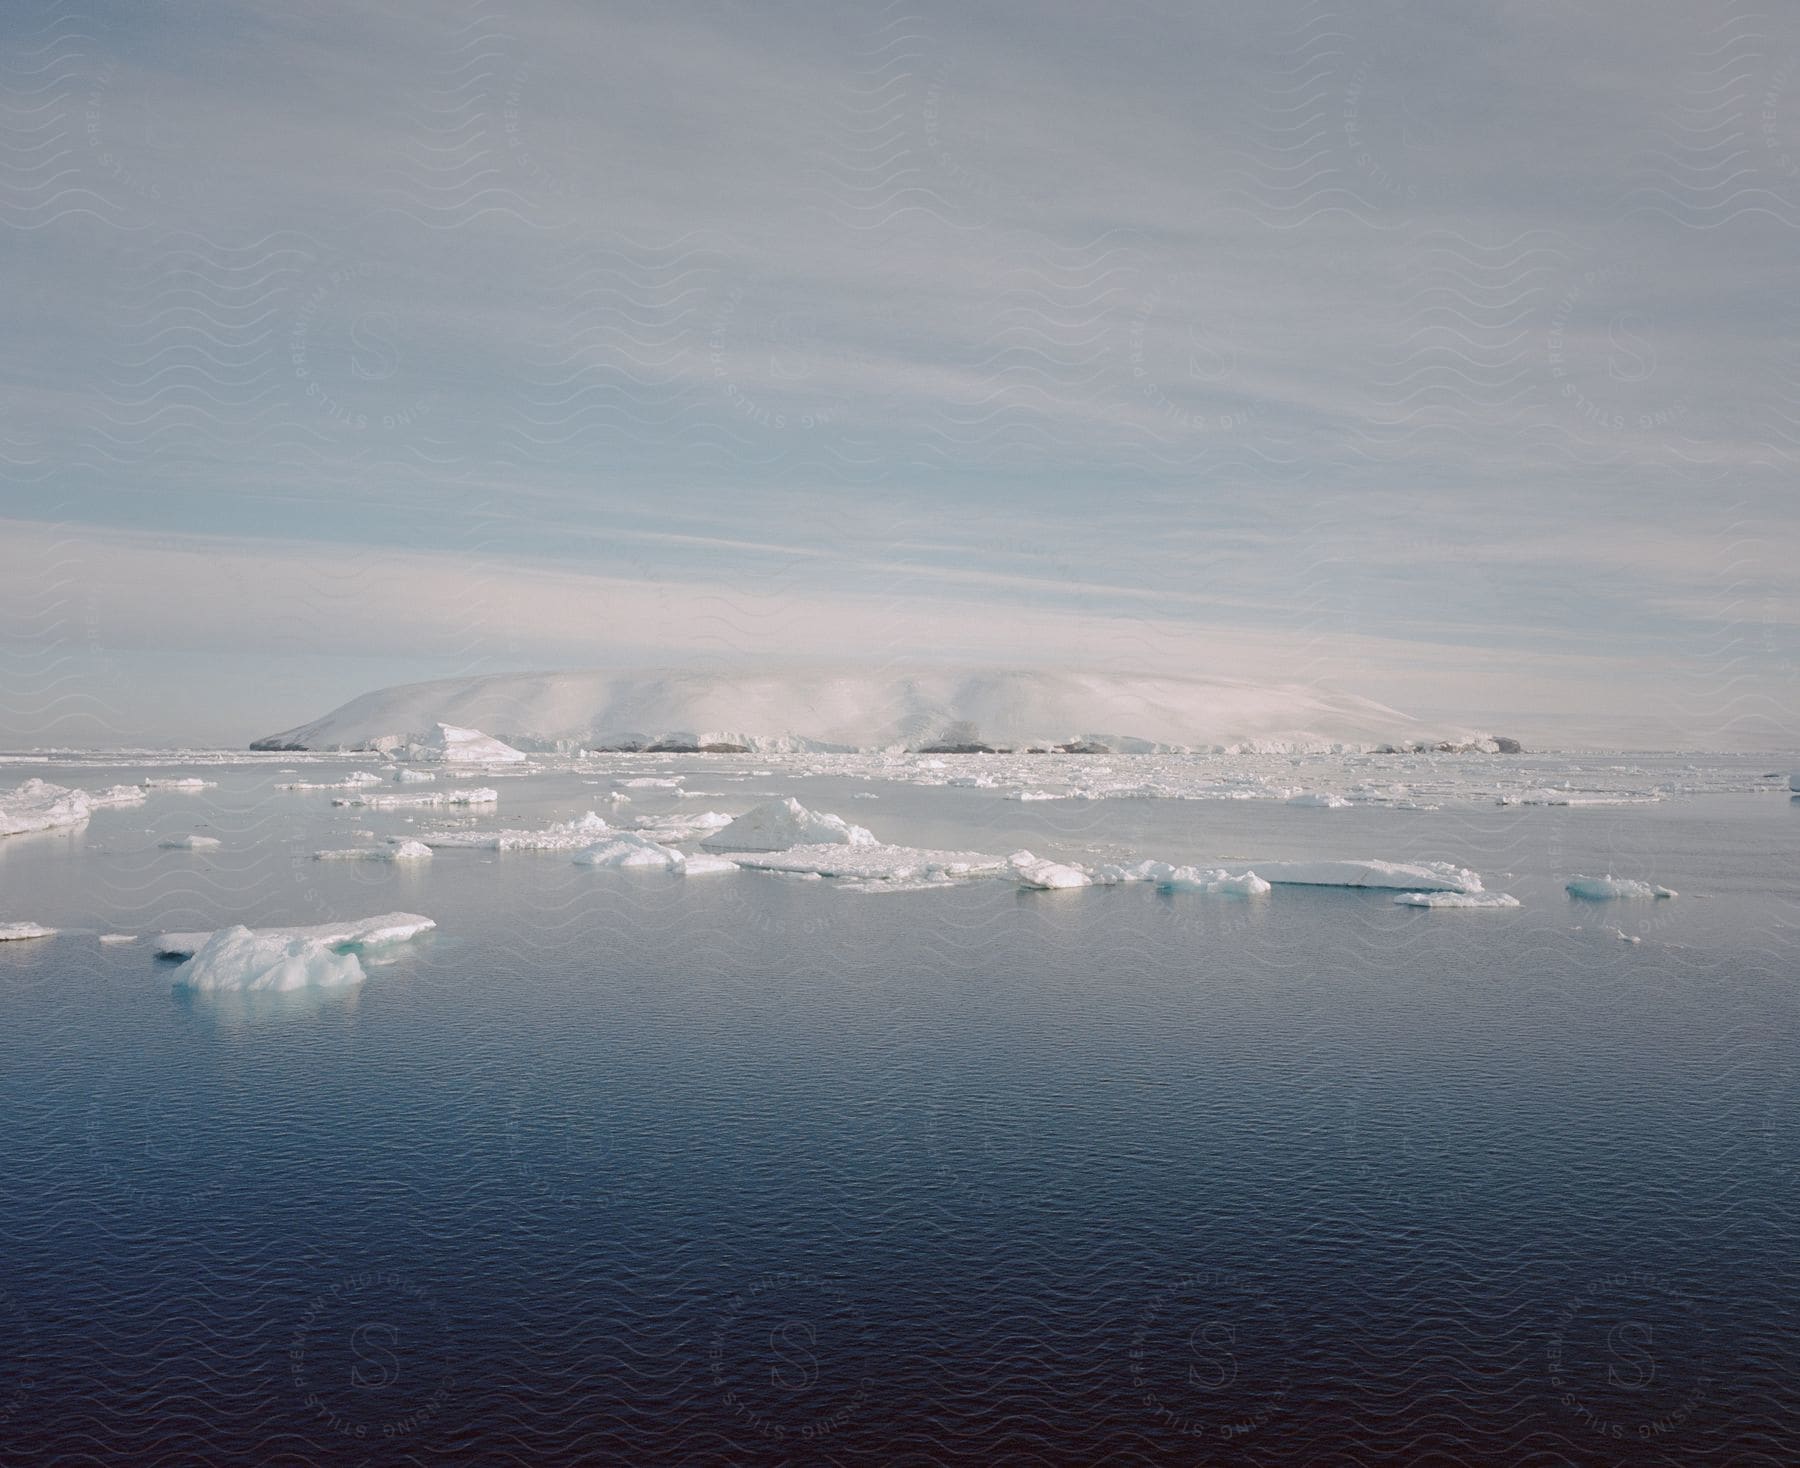 Ice caps and an iceberg float on serene water in a landscape